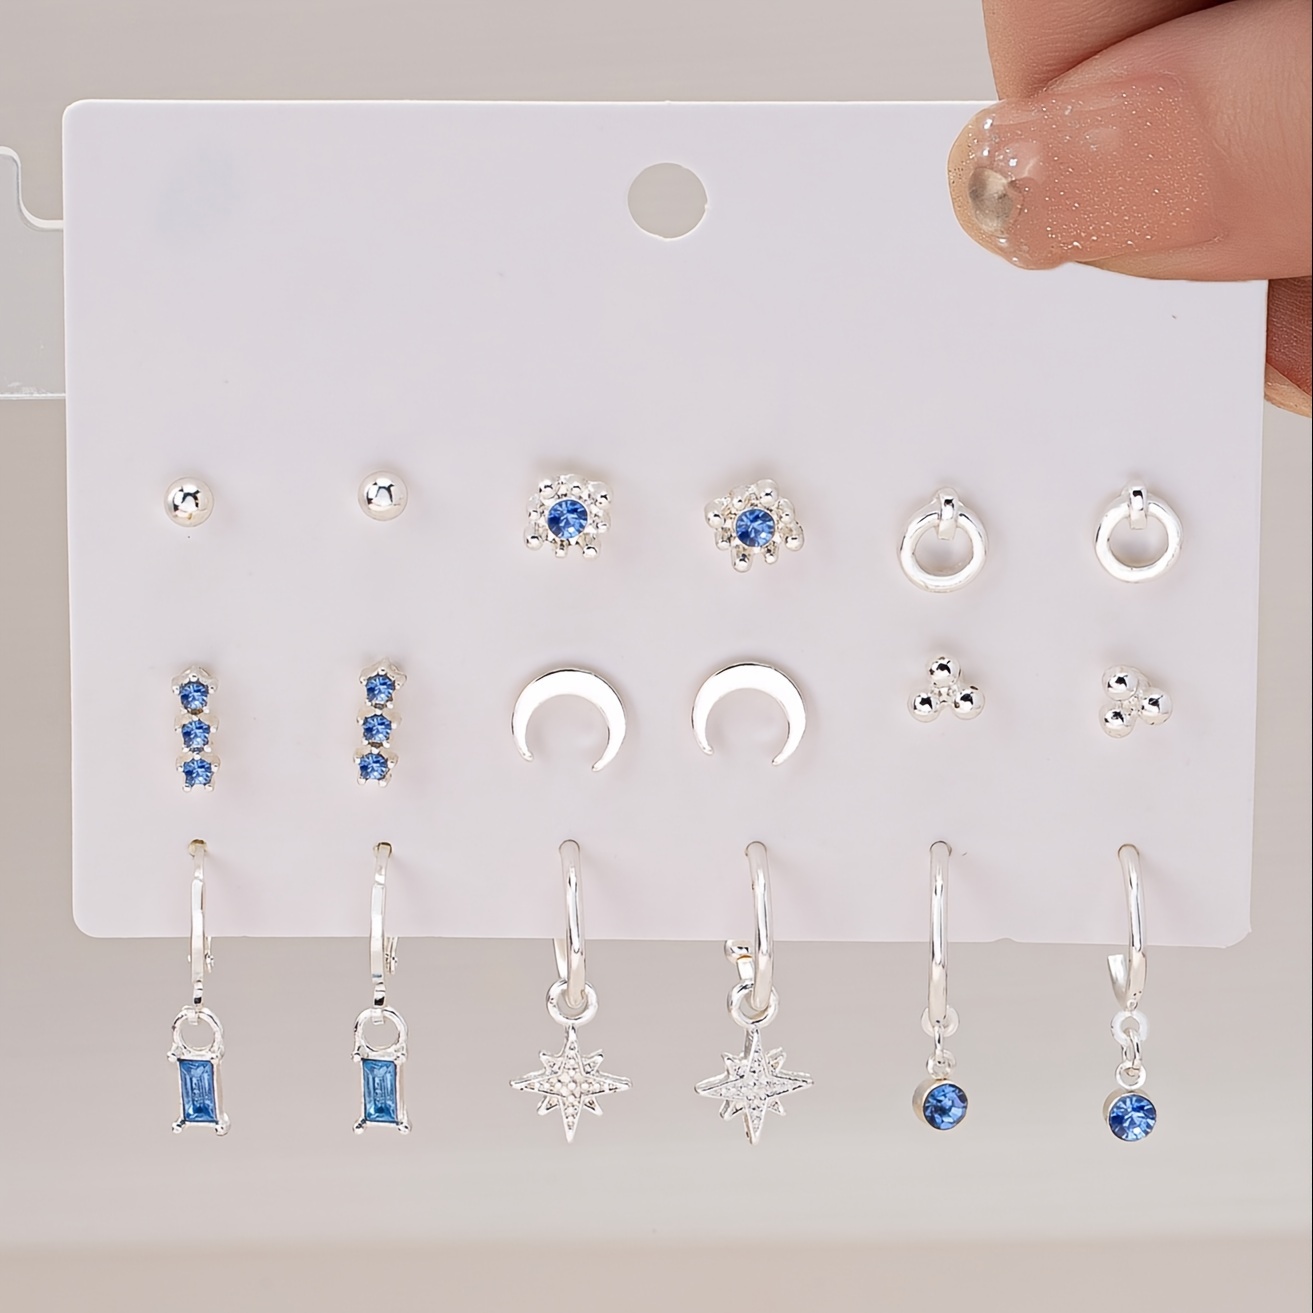 

Chic 9-piece Set: Silvery & Golden-plated Hoop Earrings With Light Blue Rhinestones - Moon, Star, And Bean Motifs - Perfect For Everyday Wear & Gifting